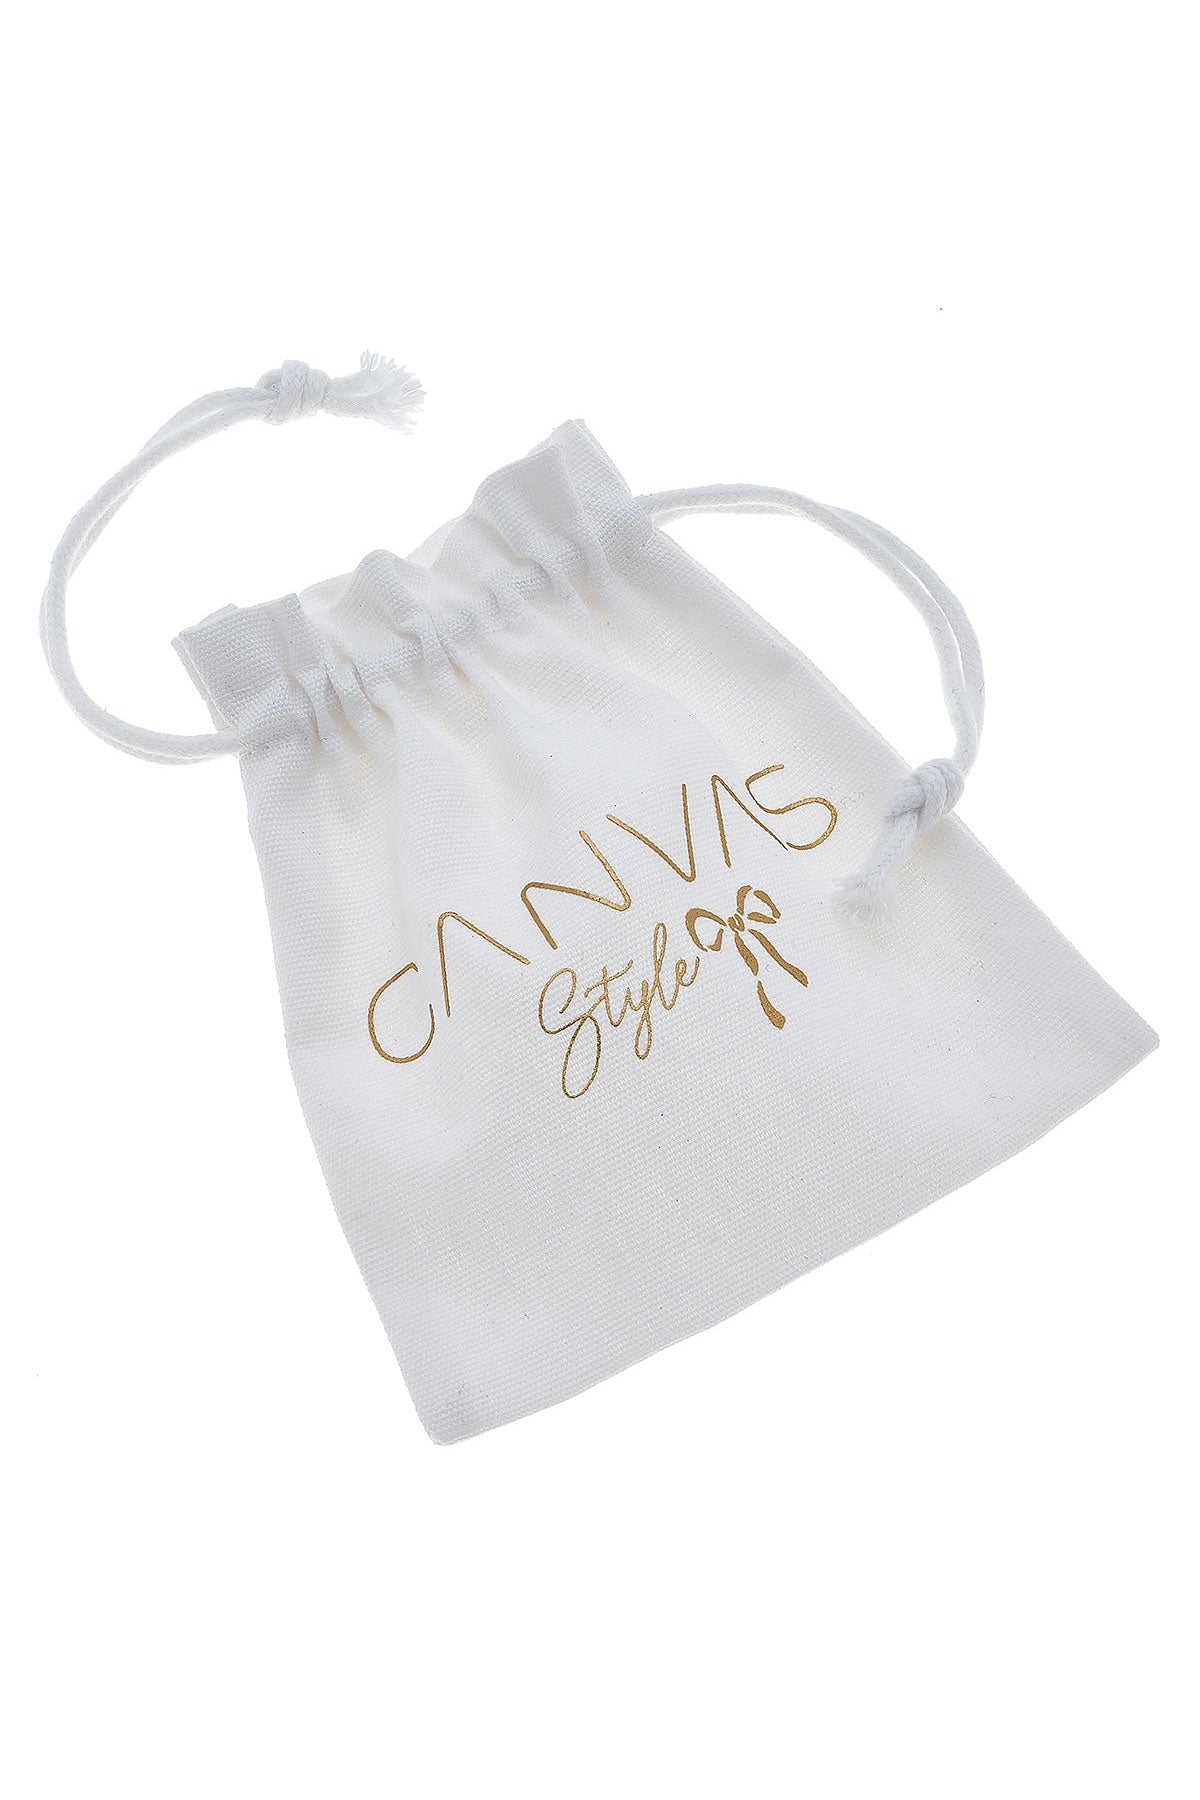 CANVAS Gift Pouch in White Canvas with Gold Foil Accents